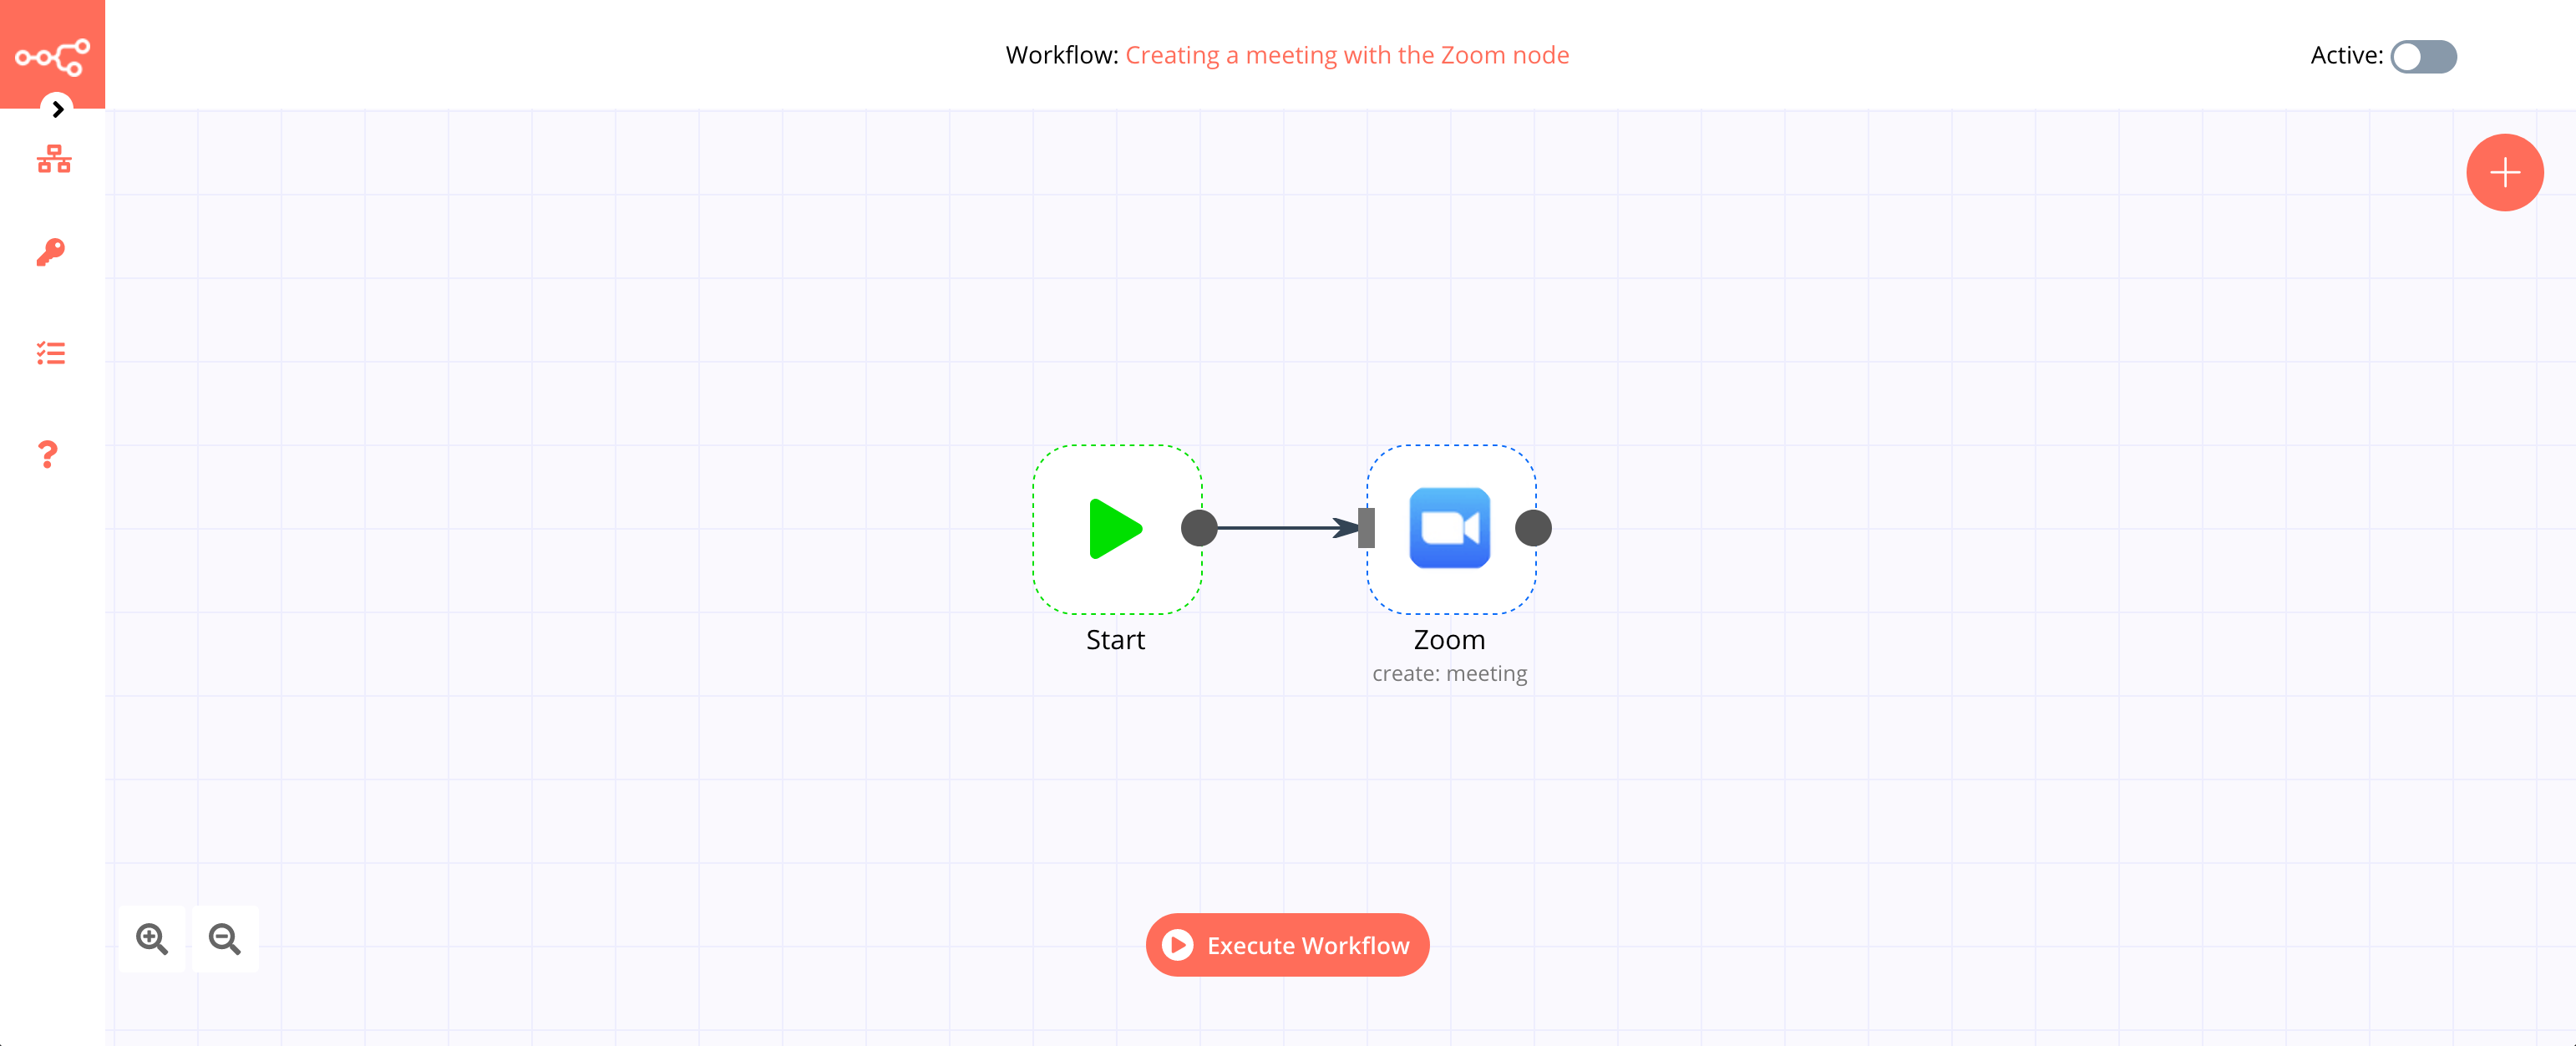 A workflow with the Zoom node